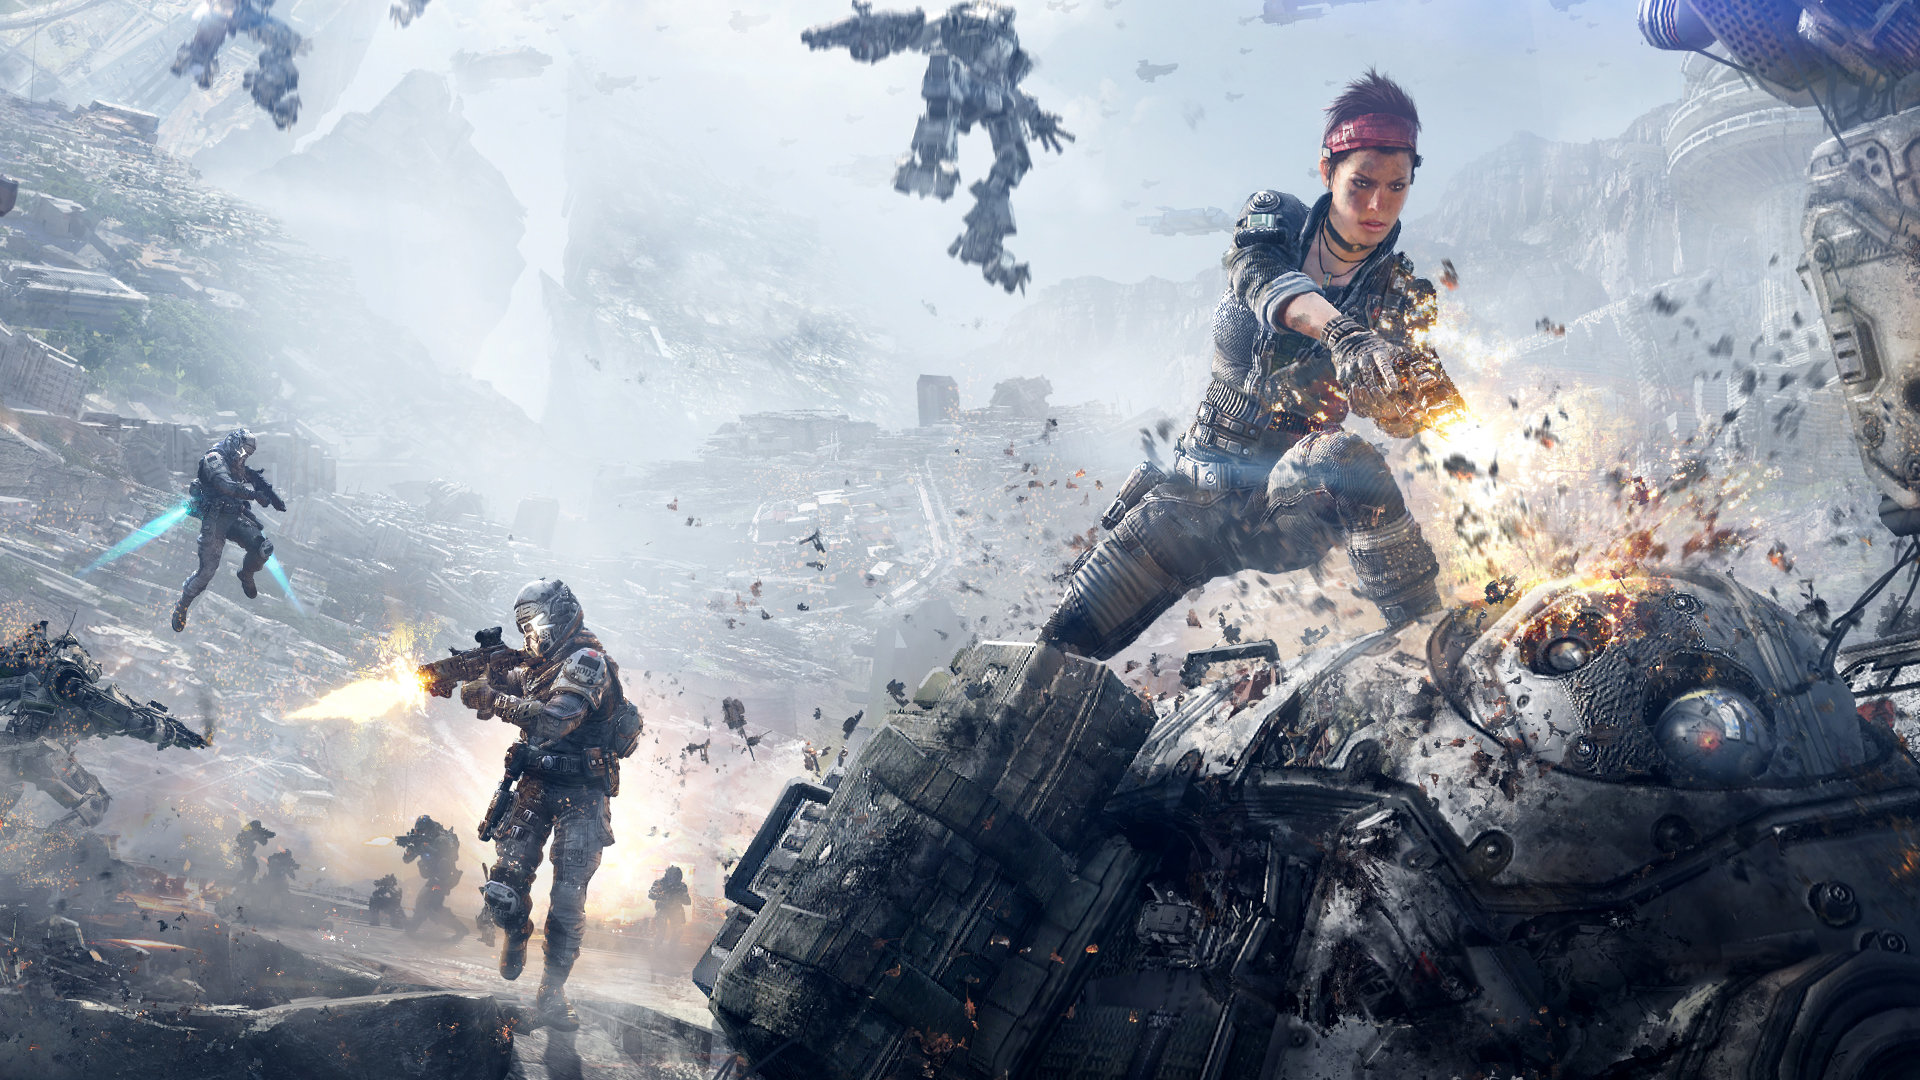 Download full hd 1920x1080 Titanfall PC background ID:127047 for free